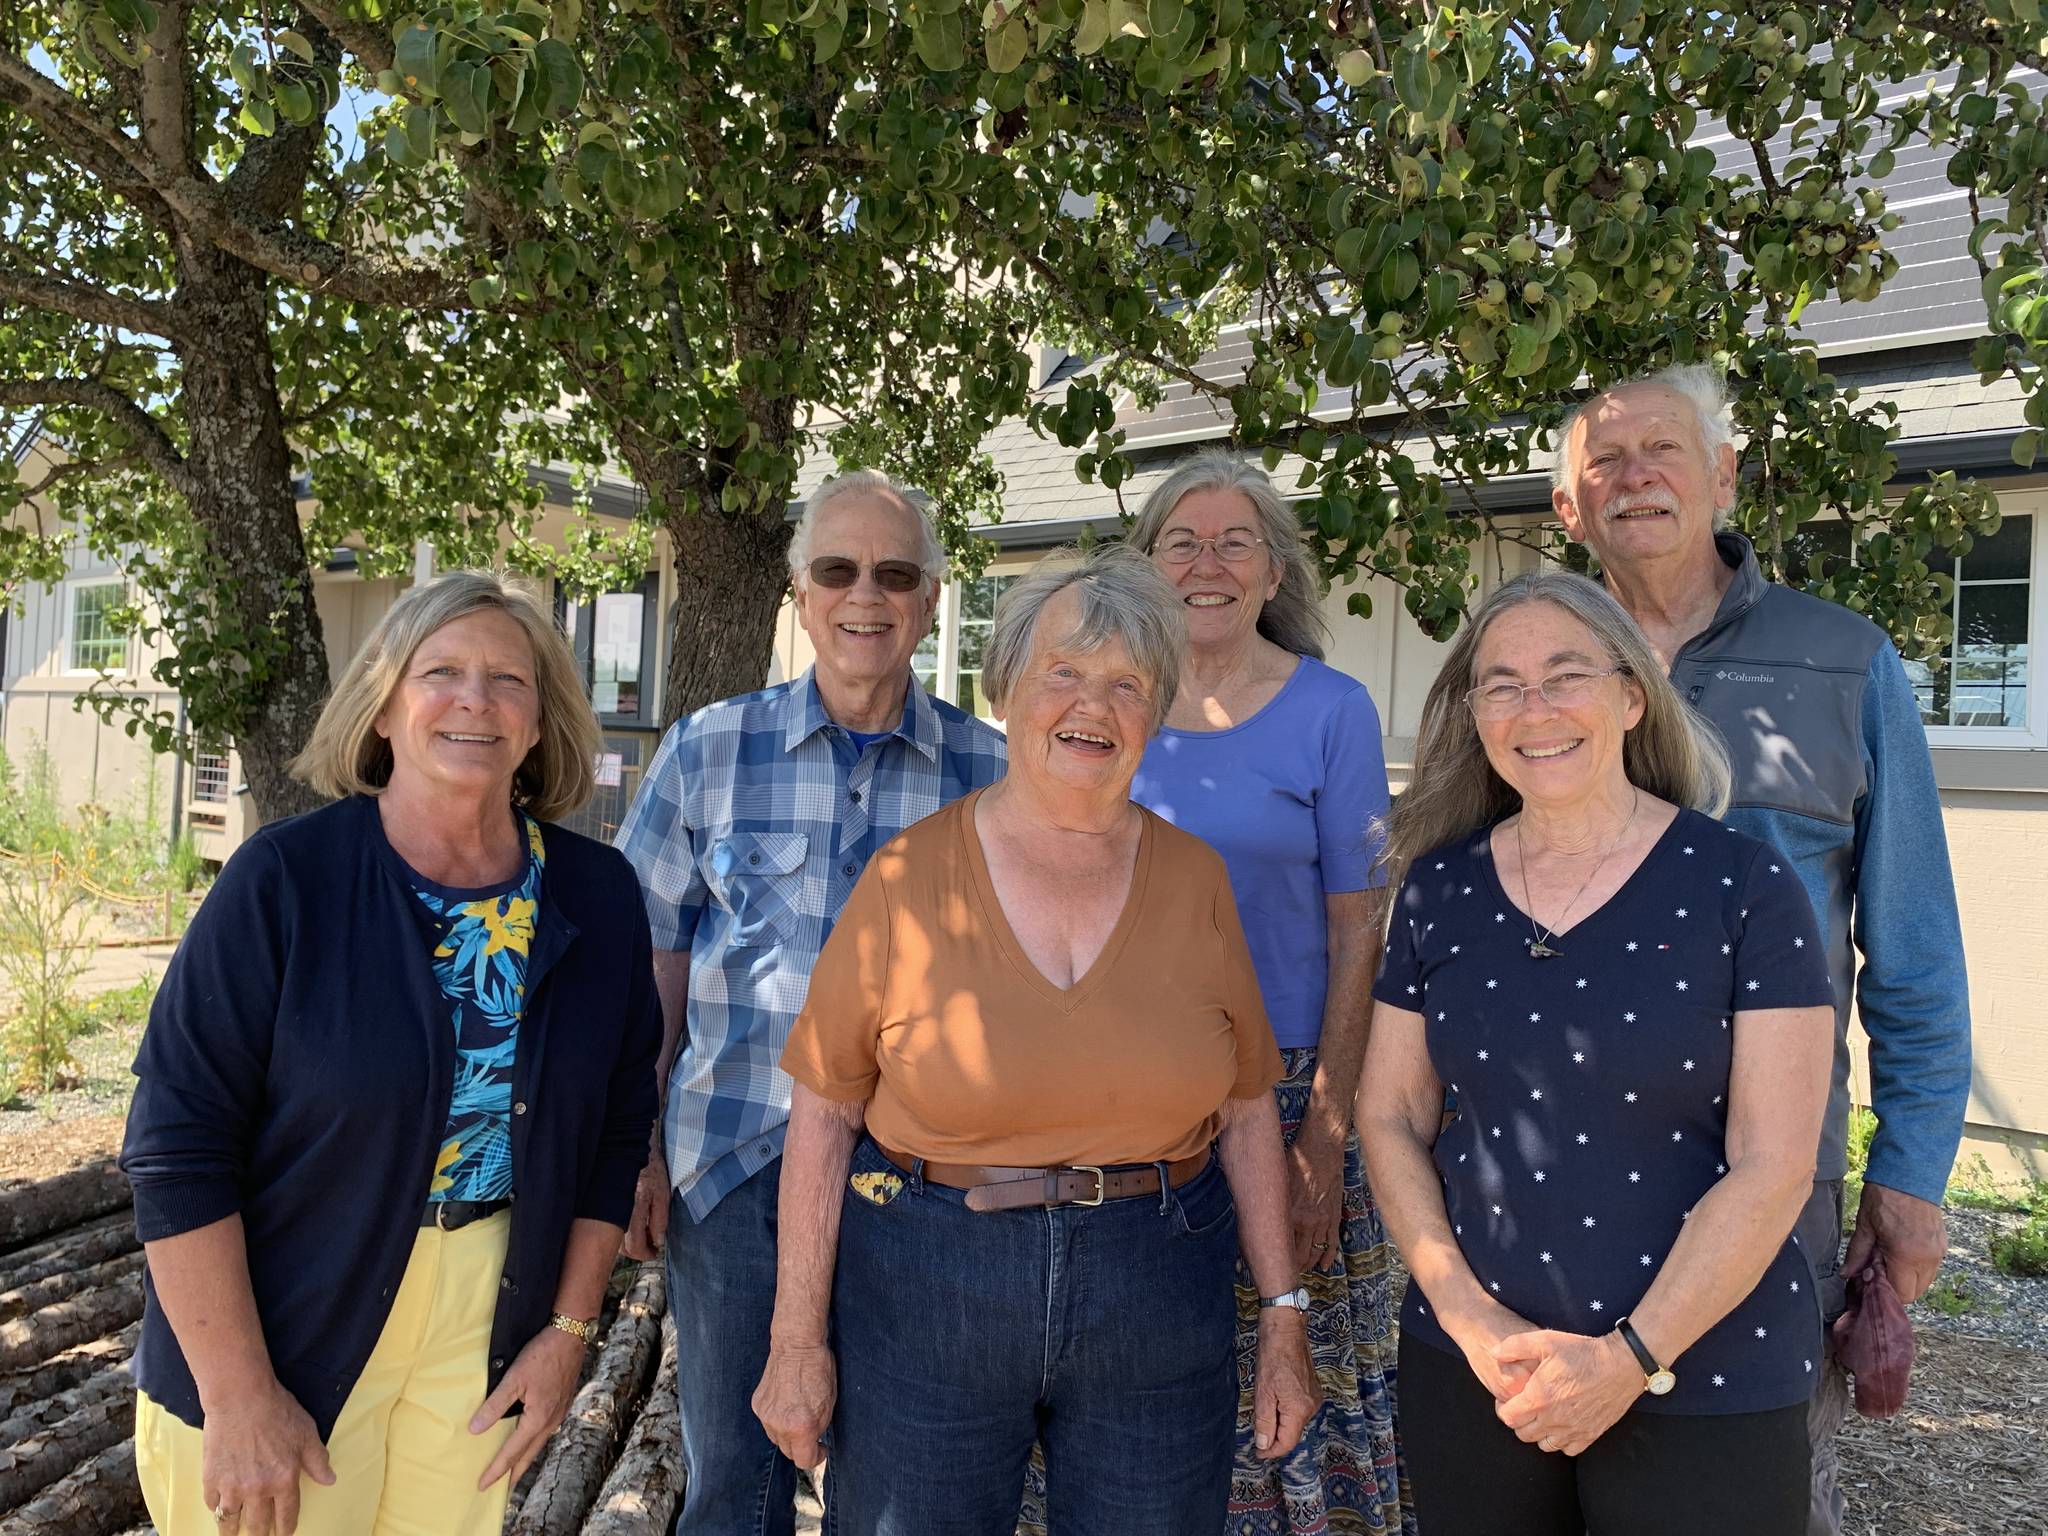 Contributed photo
SHIBA volunteers for Lopez, Orcas and San Juan Islands. Front row: Holly Henry, Pat VanSkyhawk and Patti Bjarnason, all of San Juan Island. Back row: Mac Langford of Lopez and Pegi Groundwater and Michael Moss of Orcas.